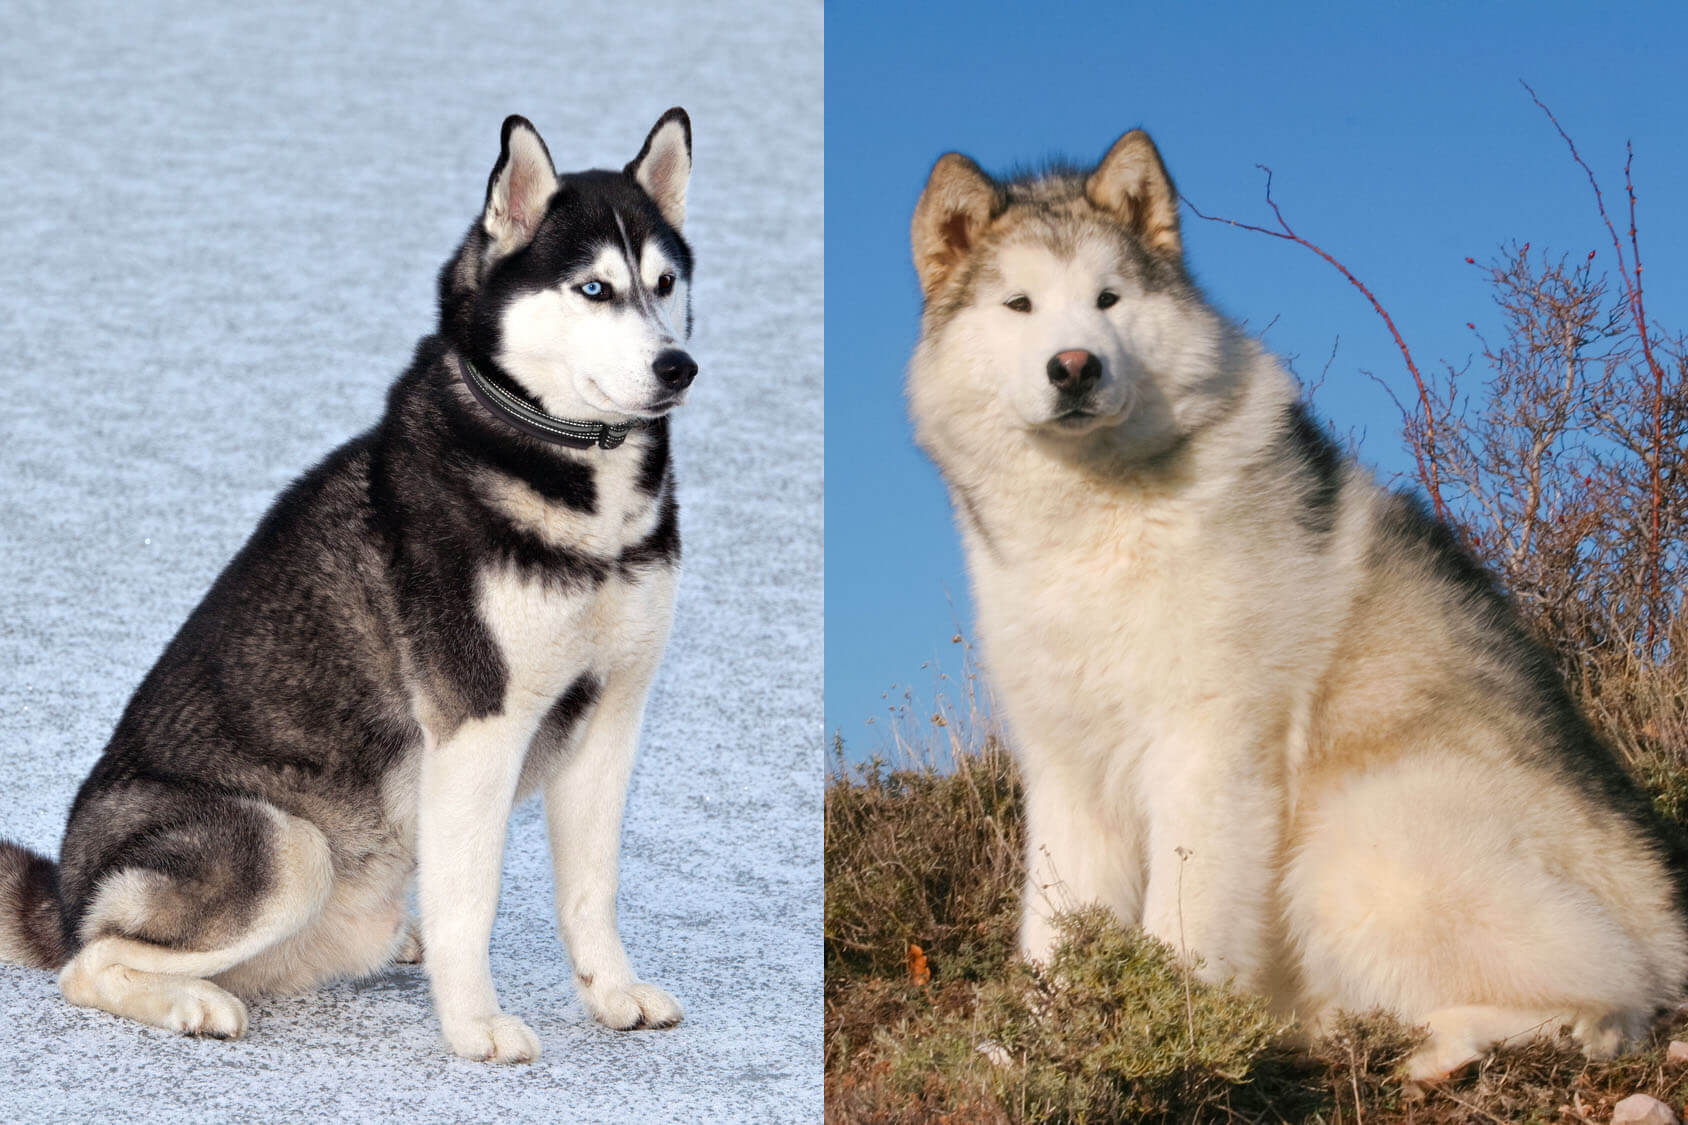 Husky And Malamute: Can You Tell Their Differences? HUSKY AND MALAMUTE